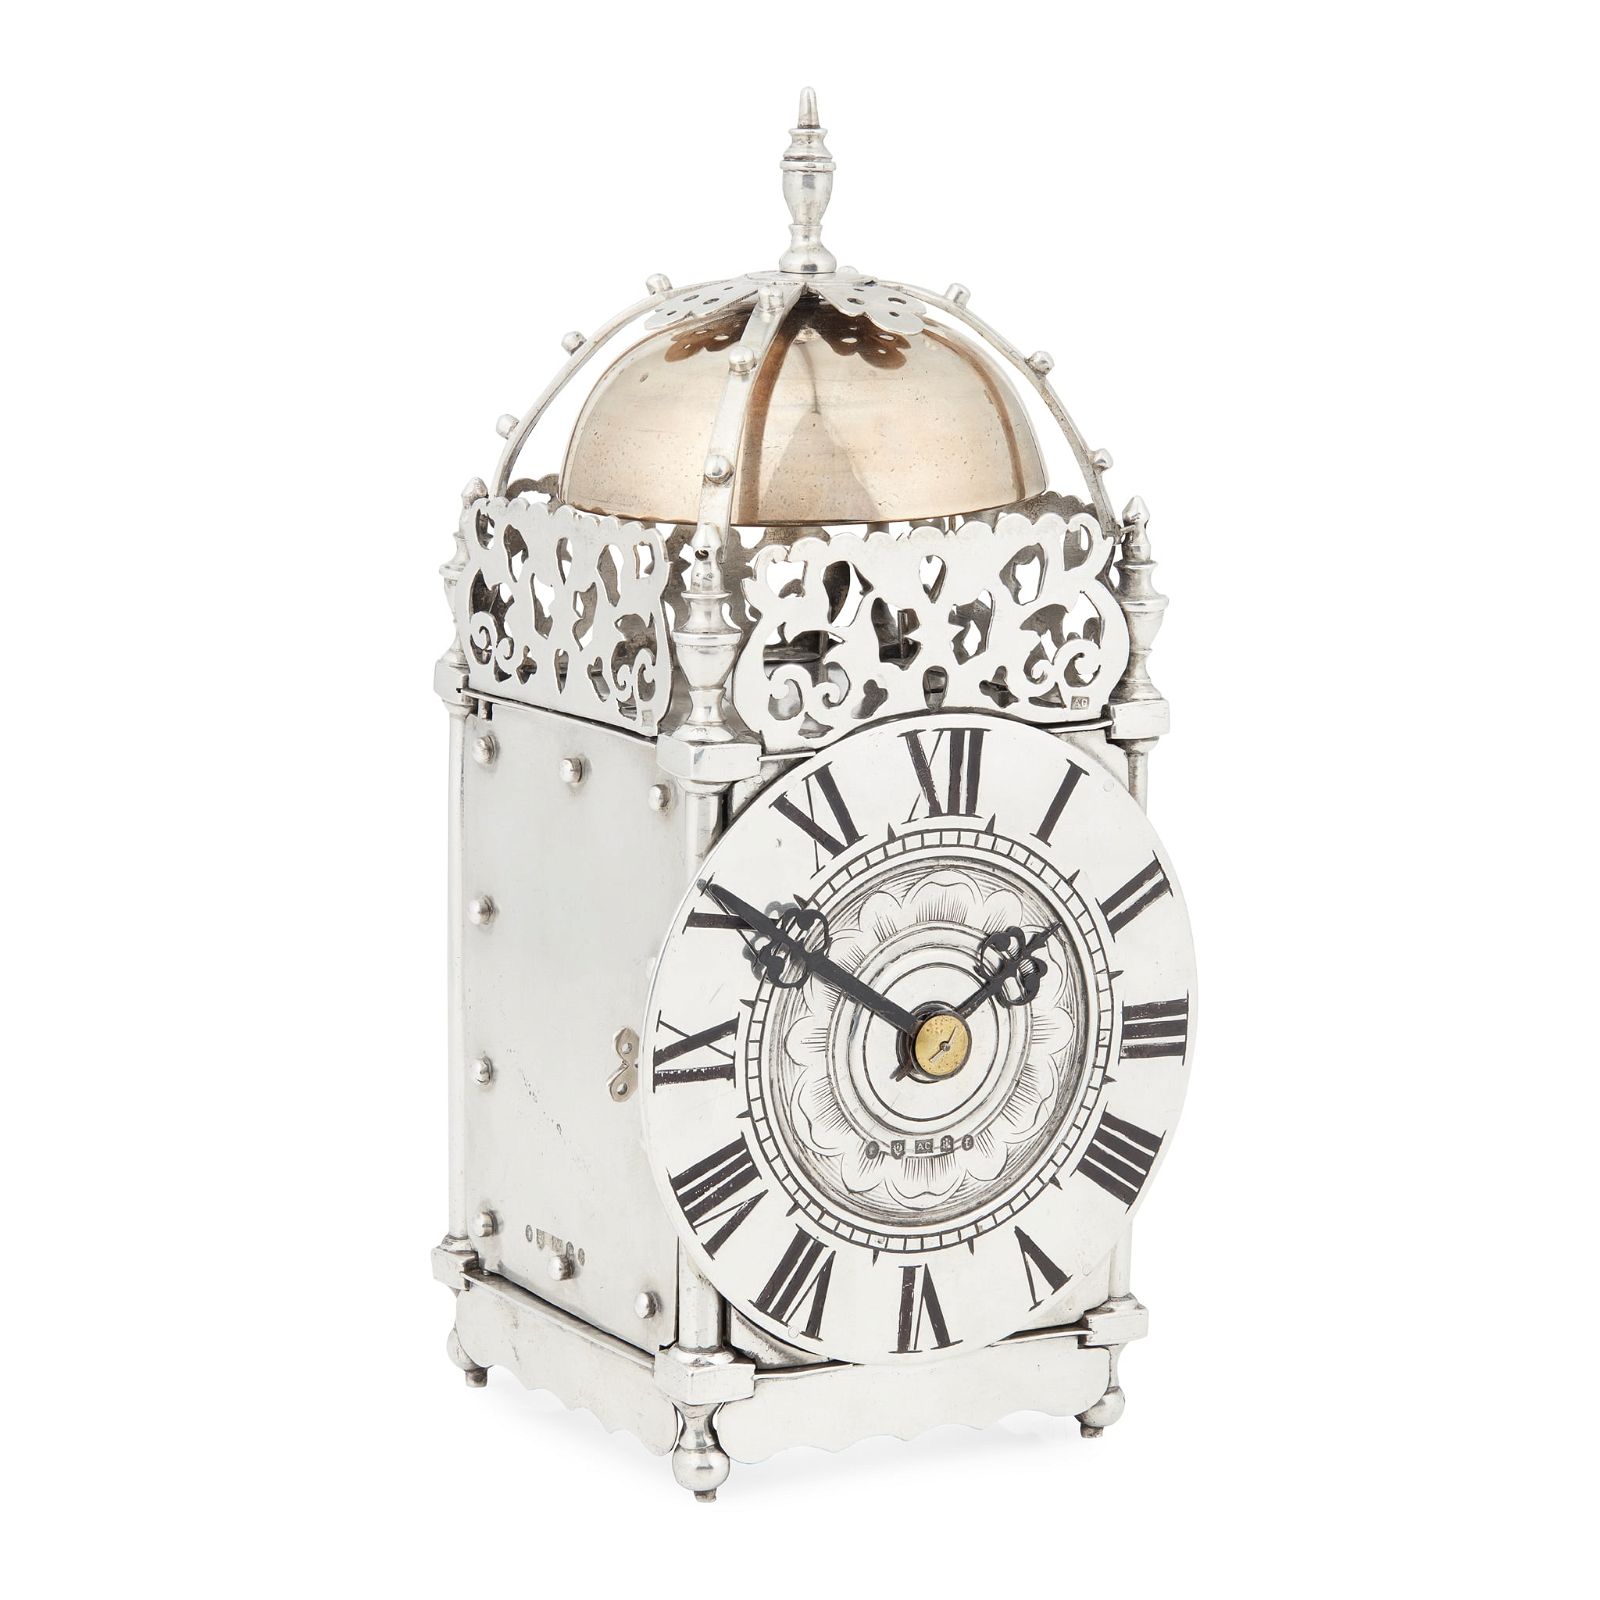 Victorian silver lantern clock by Alexander Chalmers, estimated at £1,200-£1,500 at Lyon & Turnbull.